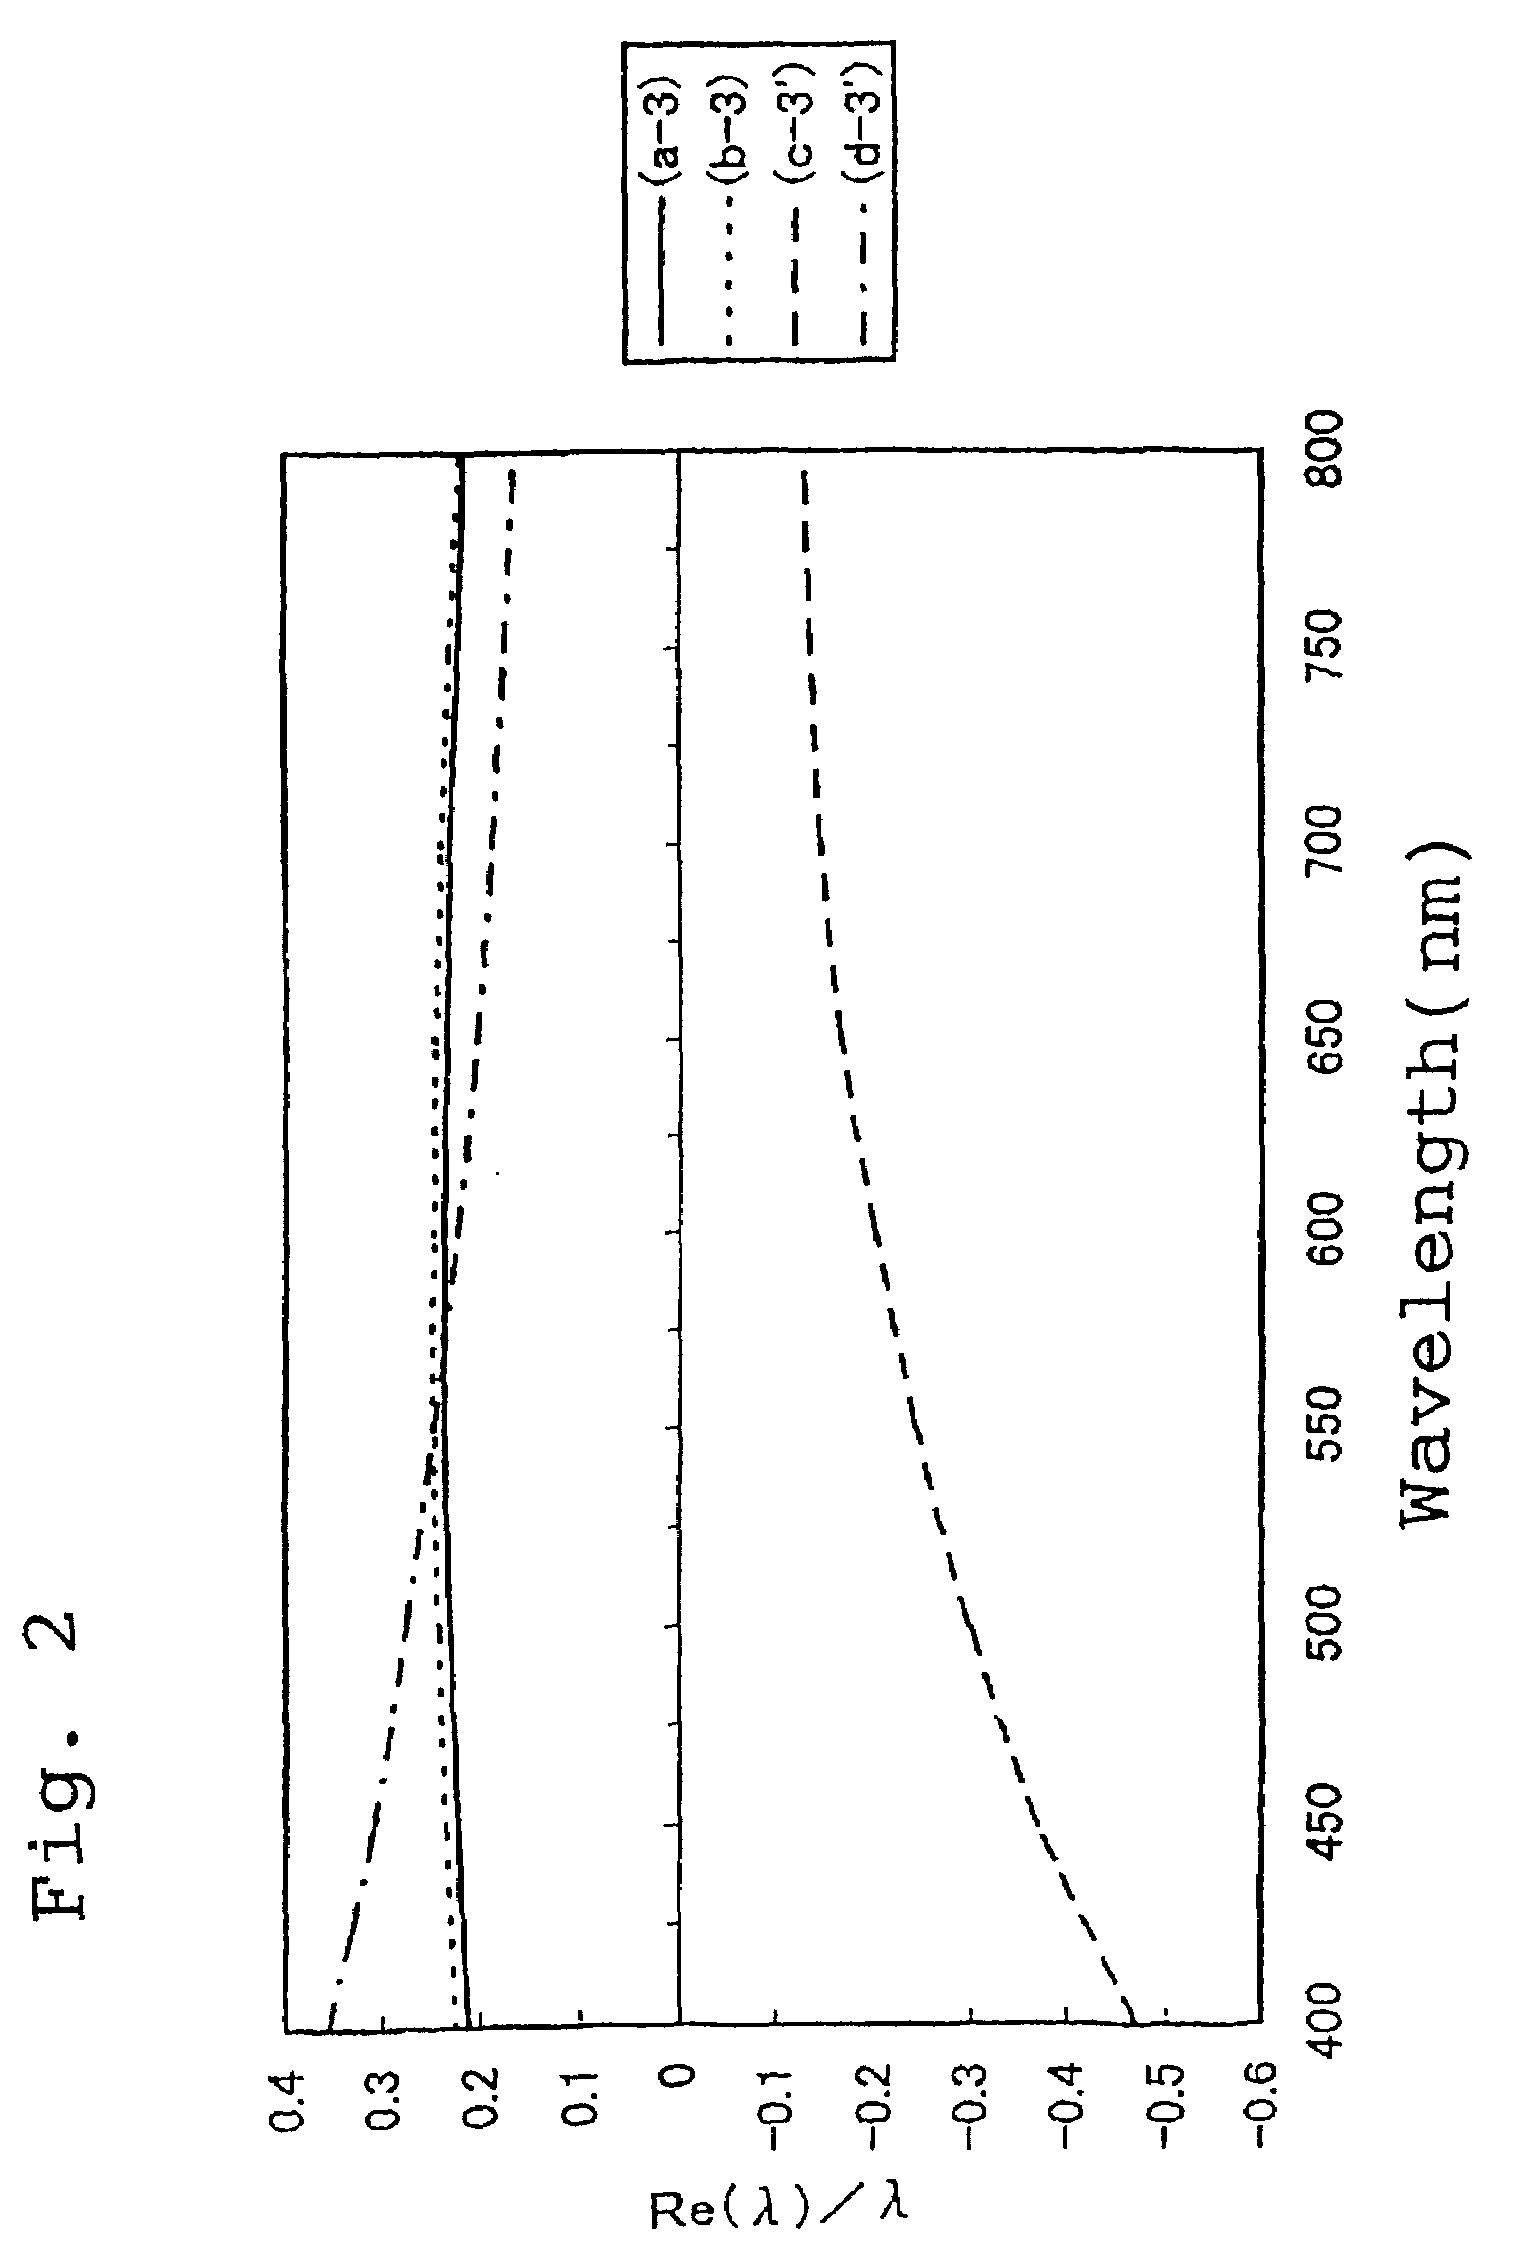 Thermoplastic norbornene resin based optical film